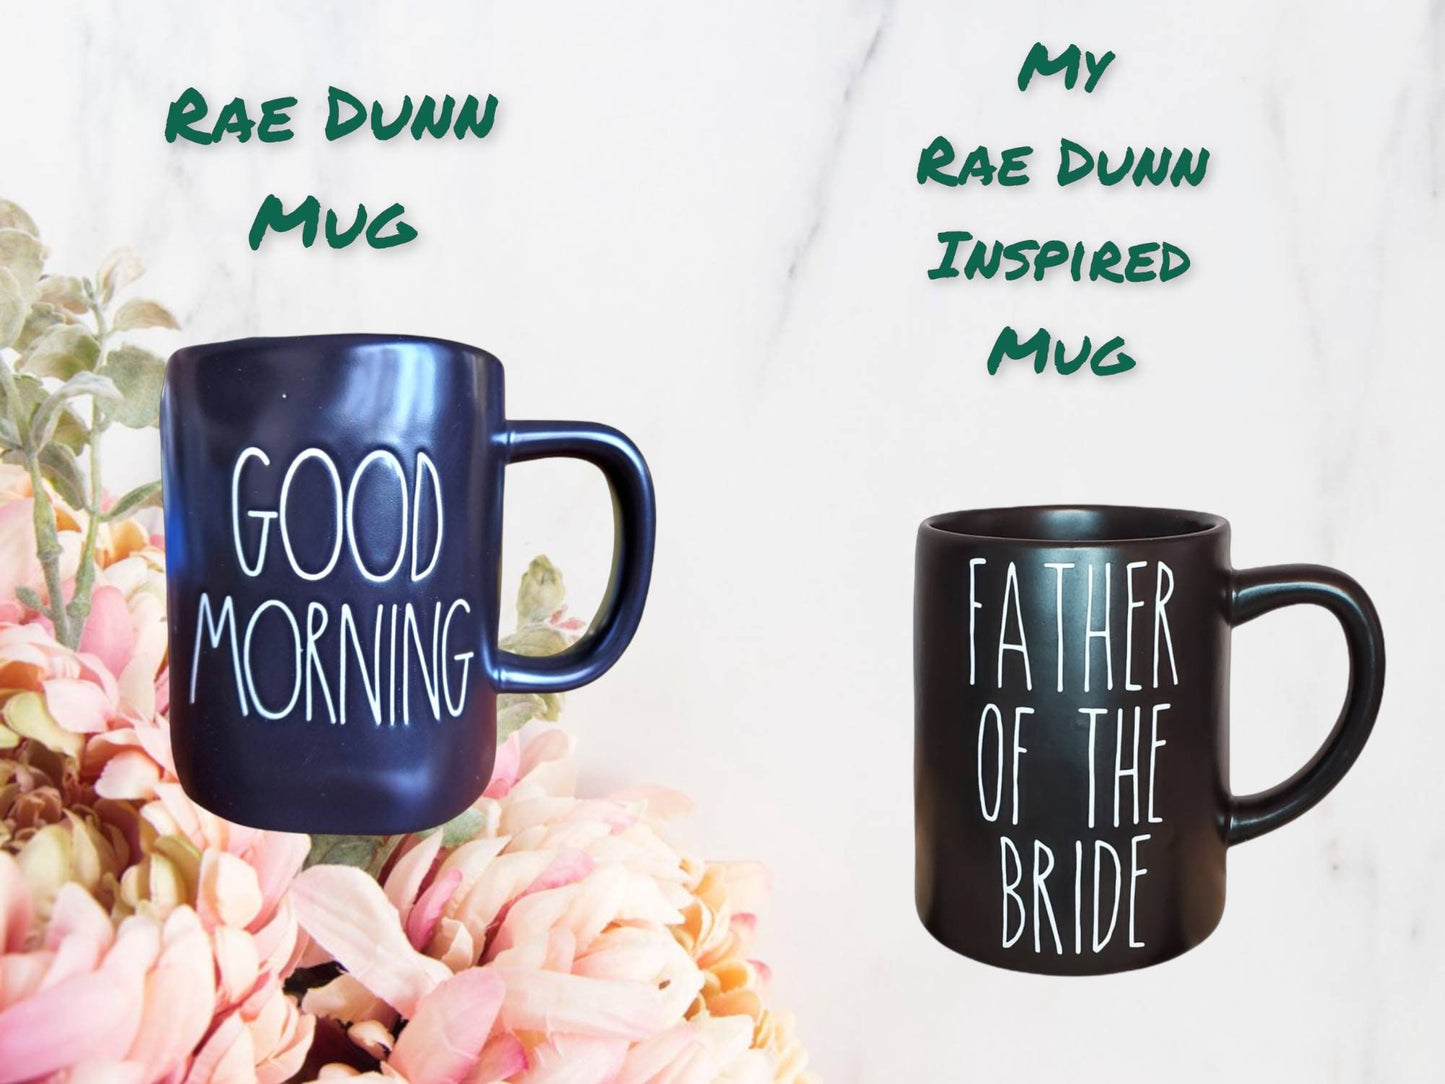 Rae Dunn Inspired Rustic Mugs in Cream, Black and Grey- Personalized